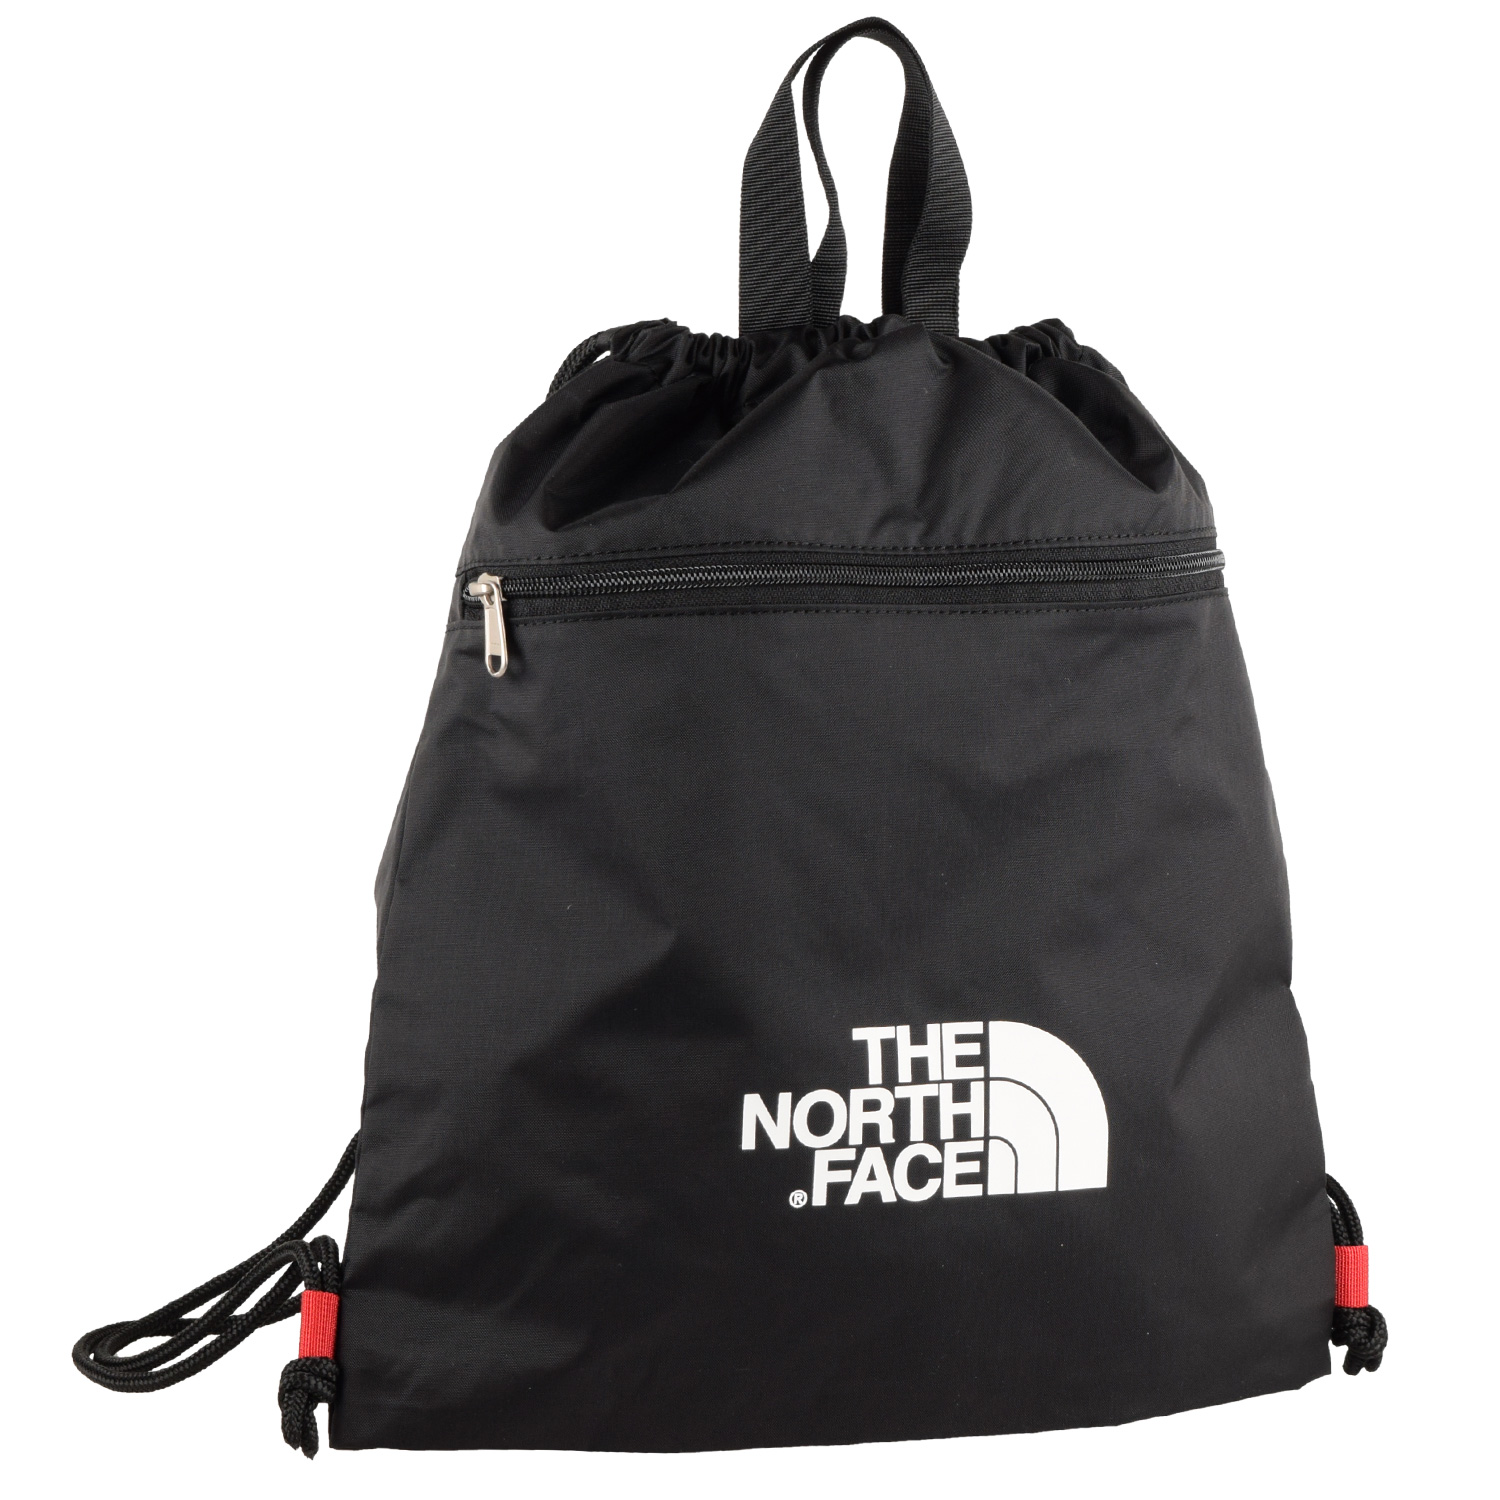 THE NORTH FACE  ナップサック バックパック